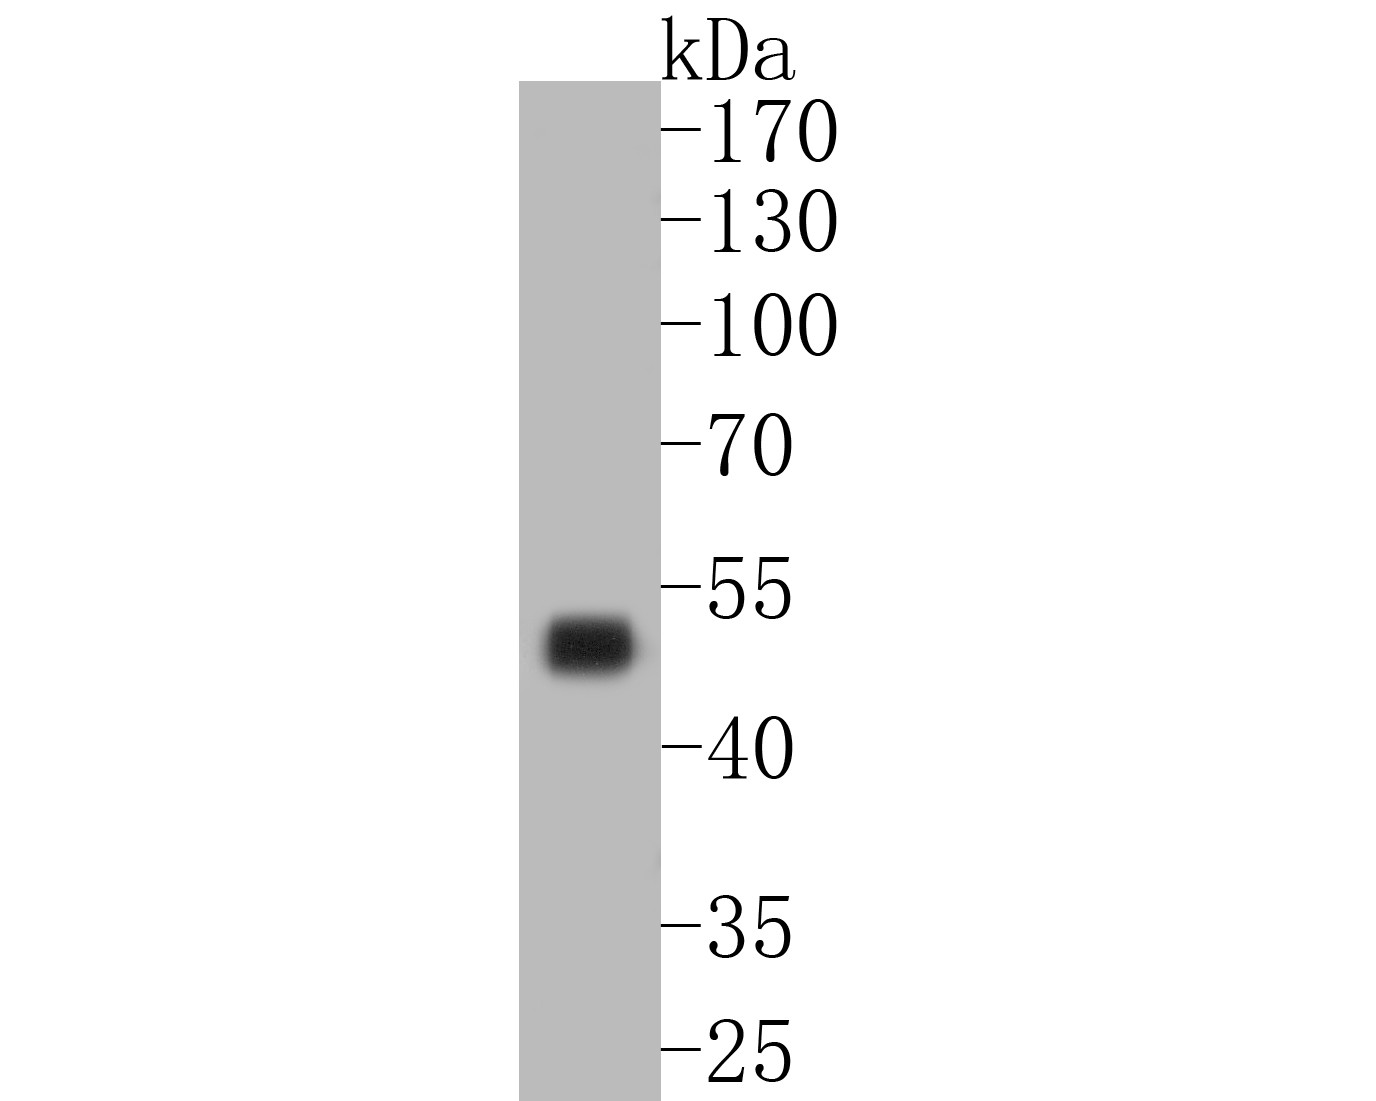 Western blot analysis of CD5 on human skin tissue lysates. Proteins were transferred to a PVDF membrane and blocked with 5% BSA in PBS for 1 hour at room temperature. The primary antibody (ET7110-56, 1/500) was used in 5% BSA at room temperature for 2 hours. Goat Anti-Rabbit IgG - HRP Secondary Antibody (HA1001) at 1:5,000 dilution was used for 1 hour at room temperature.